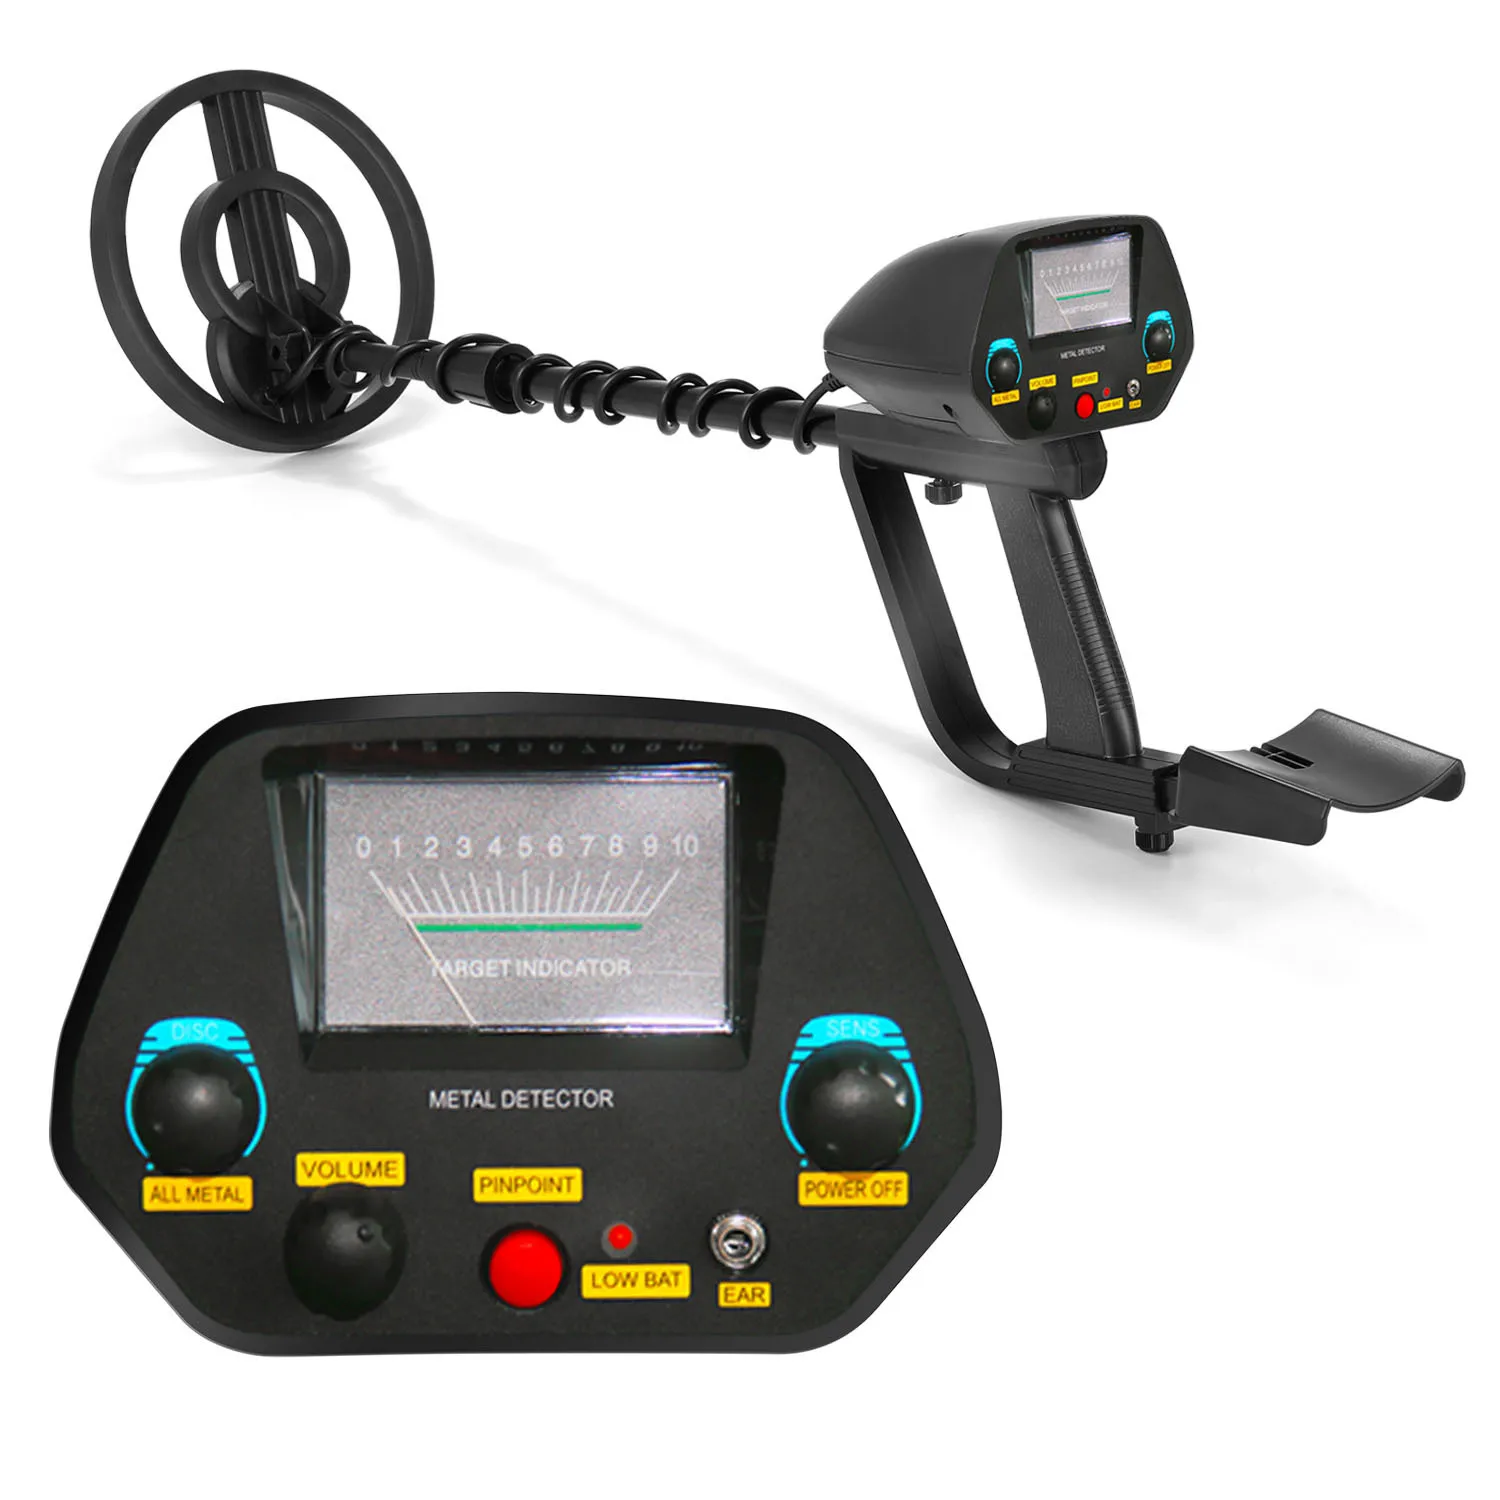 

MD-4080 Precision Metal Detector Metal Detector Underground Gold, Silver, Copper and Iron Treasures